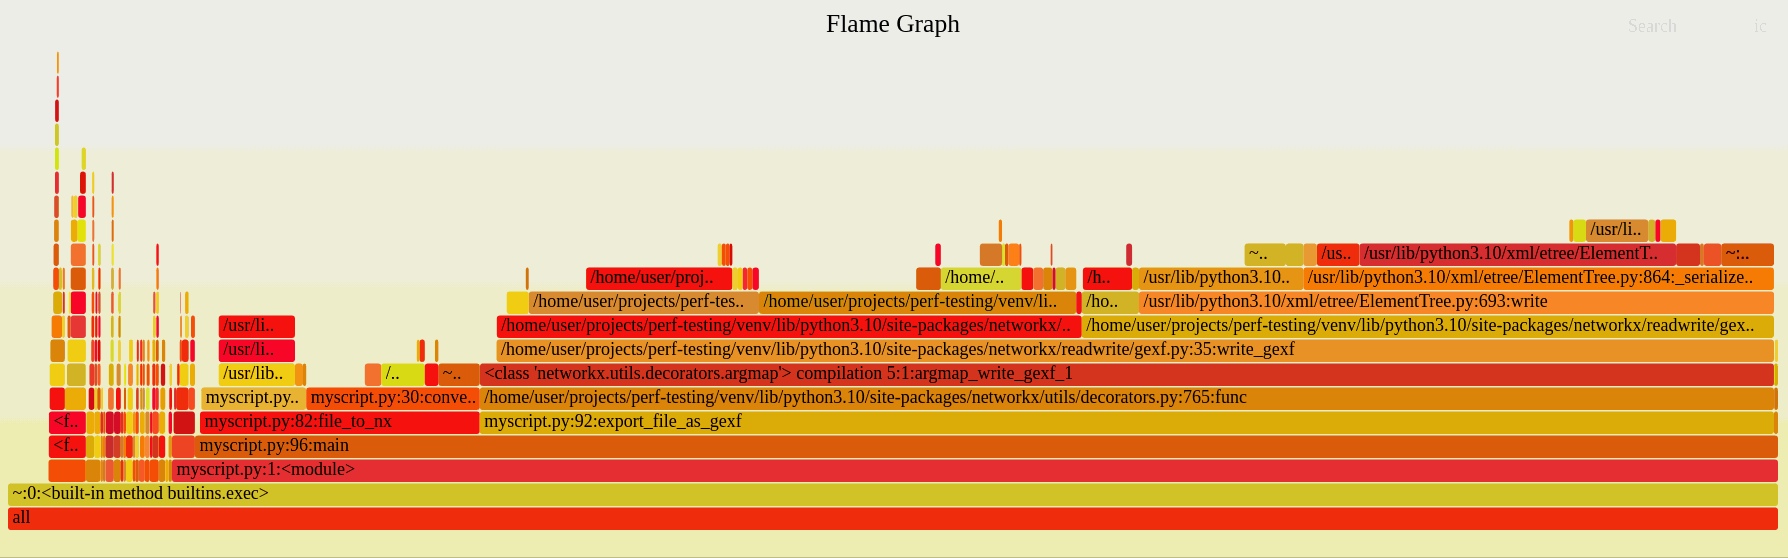 Animated GIF showing interactive zoom and search inside a flame graph